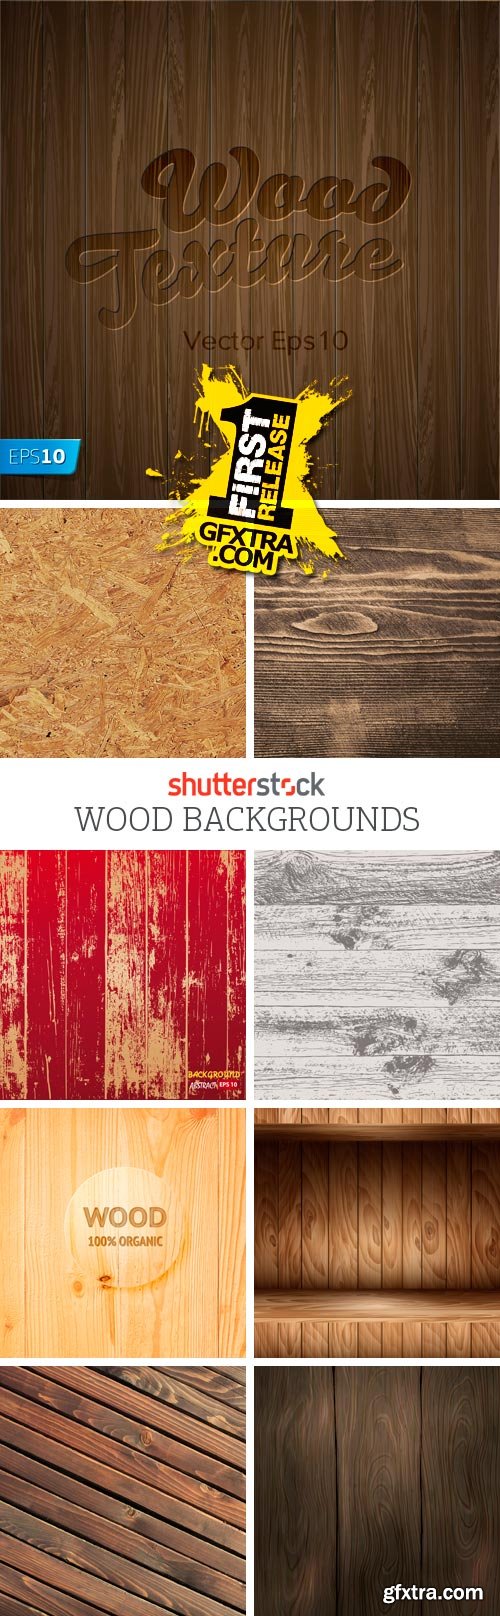 Wood Backgrounds 25xEPS